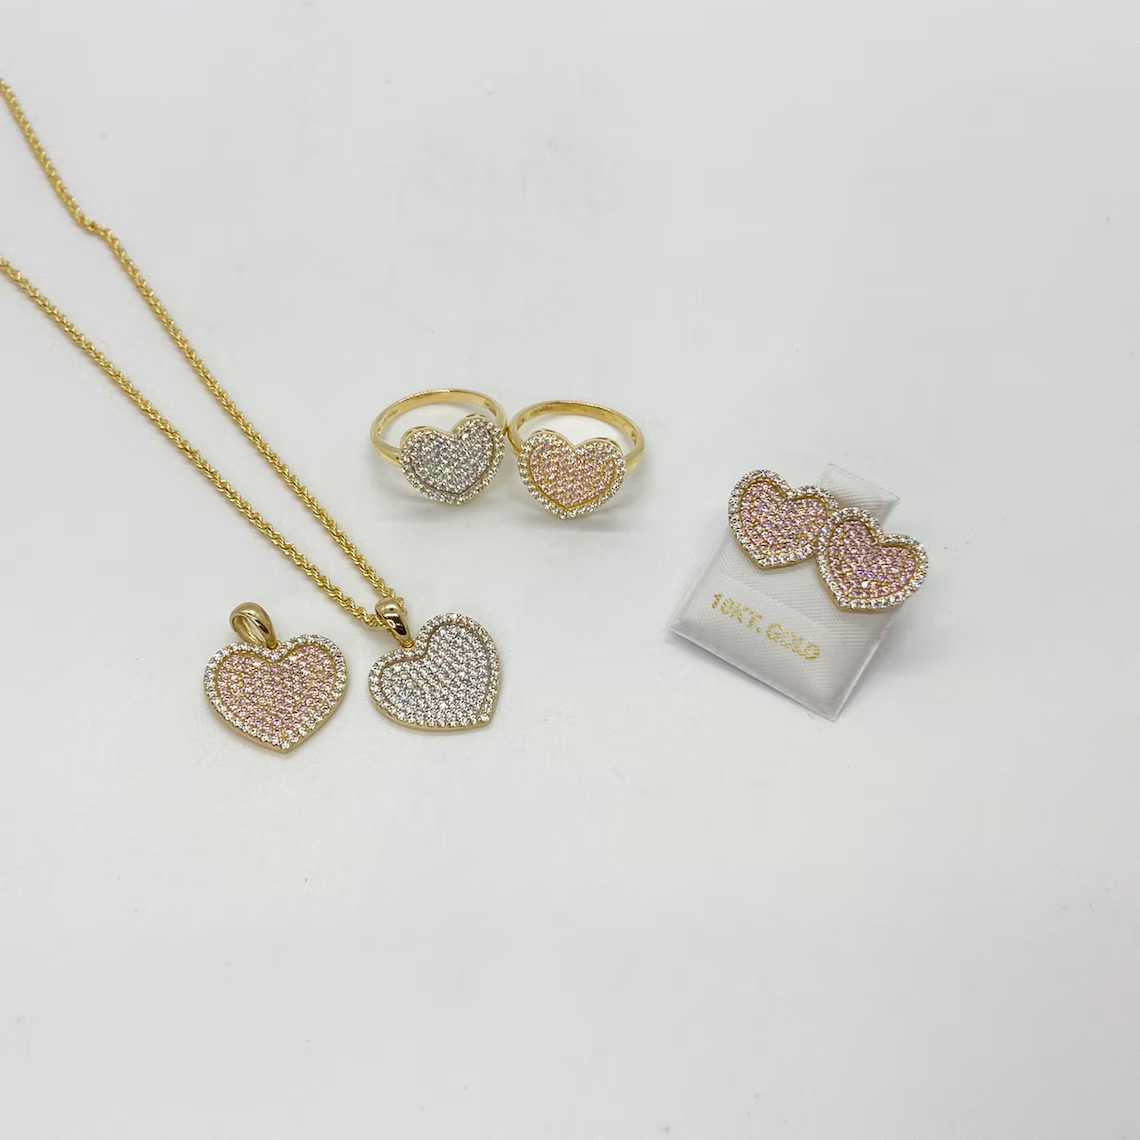 Gold Plated Love Heart Iced Out Pendant Necklace Ring And Stud Earrings 3 Piece Set